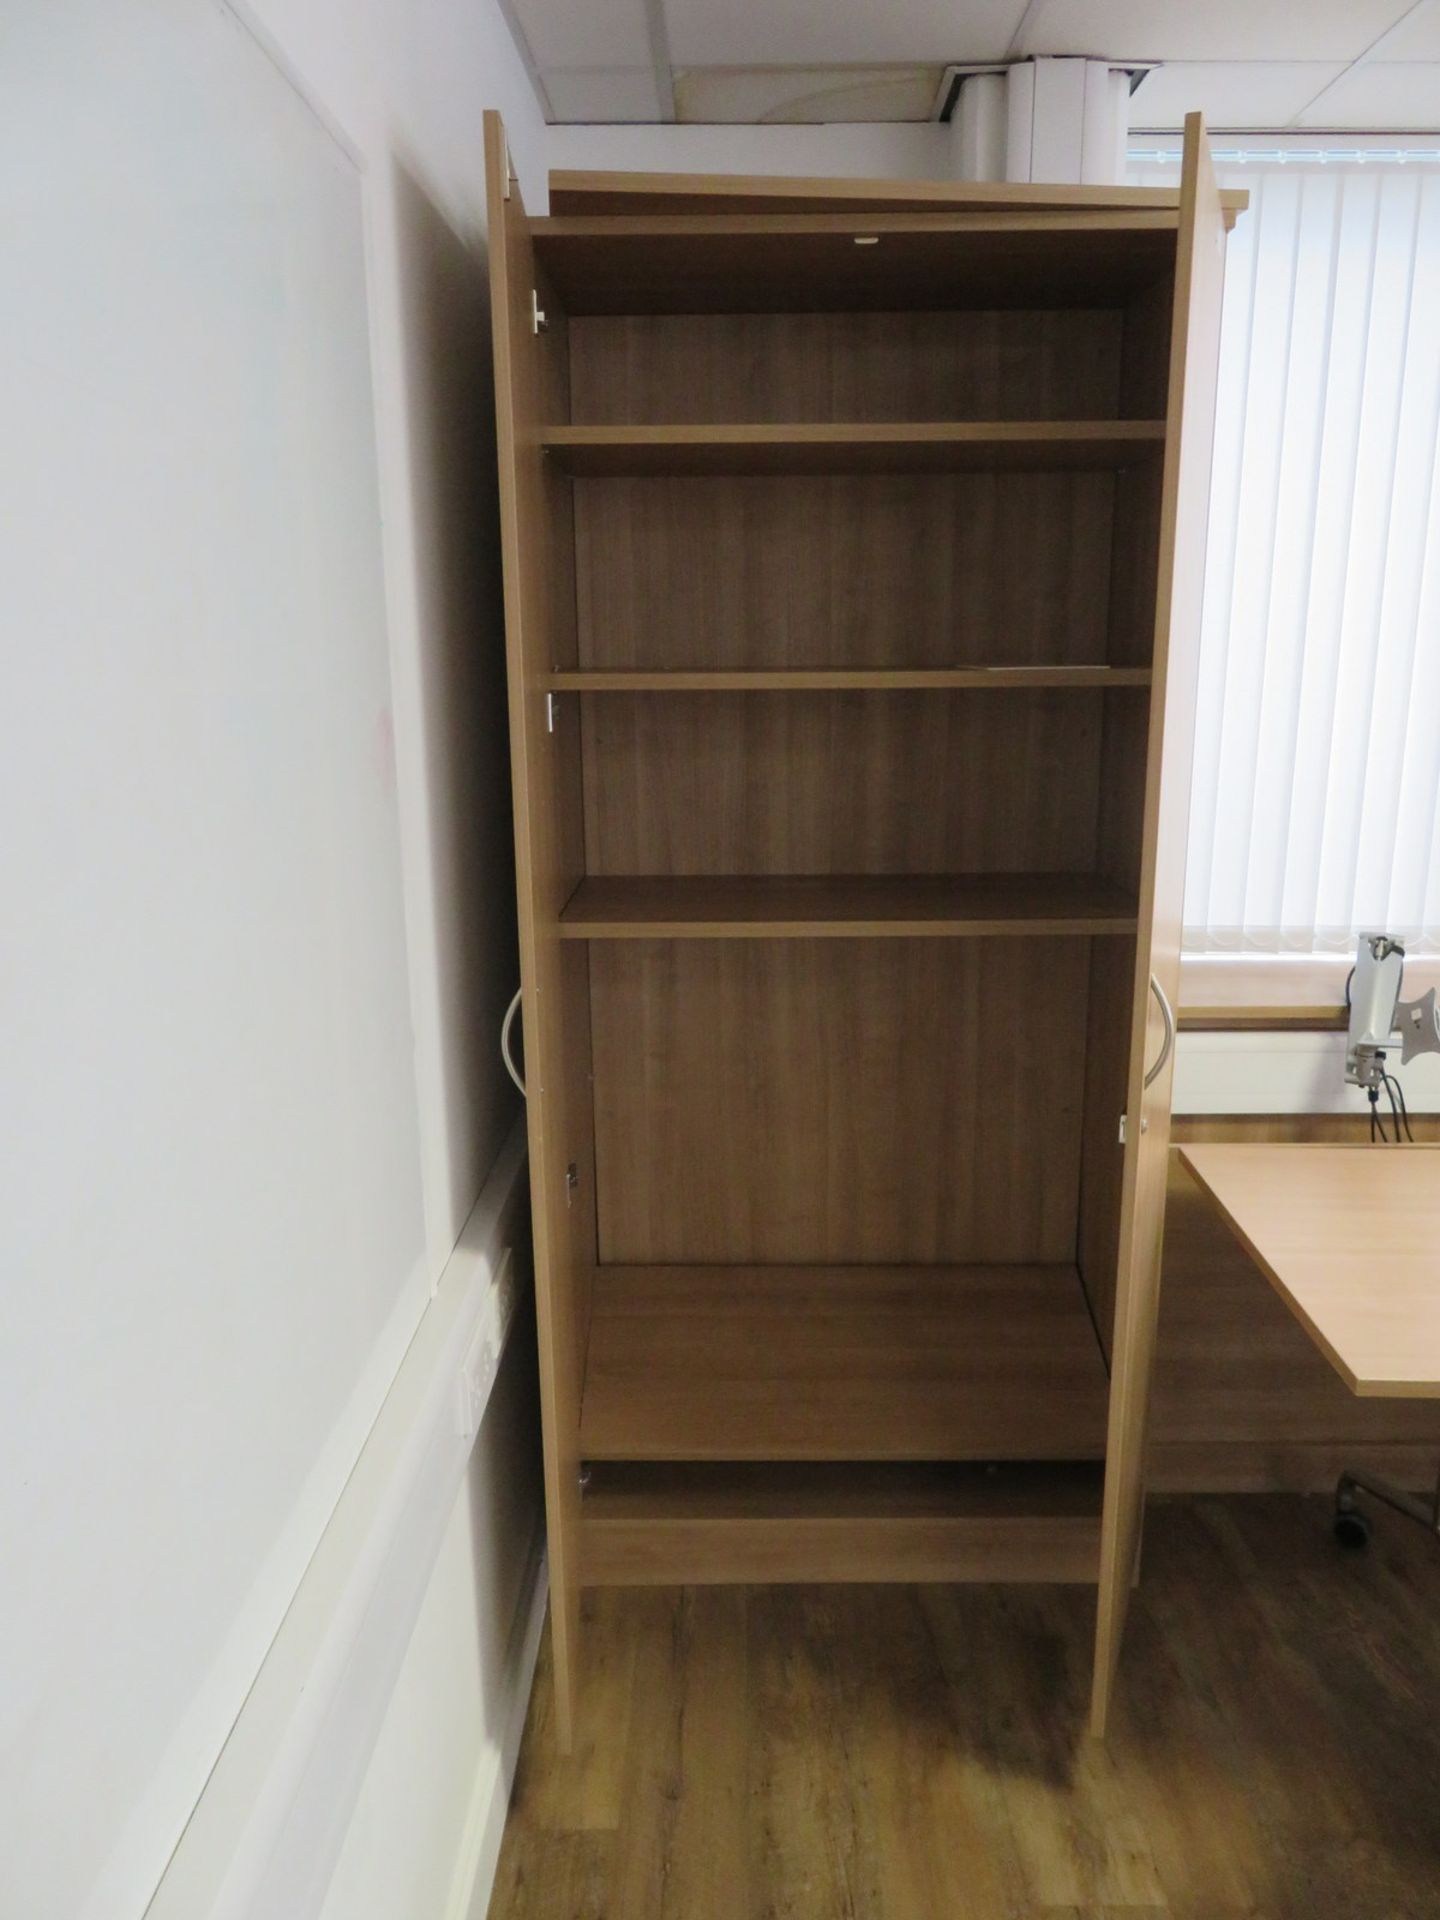 Large 2 Door Office Storage Cupboard. Dimensions: 1000x500x2200mm (LxDxH) - Image 2 of 2